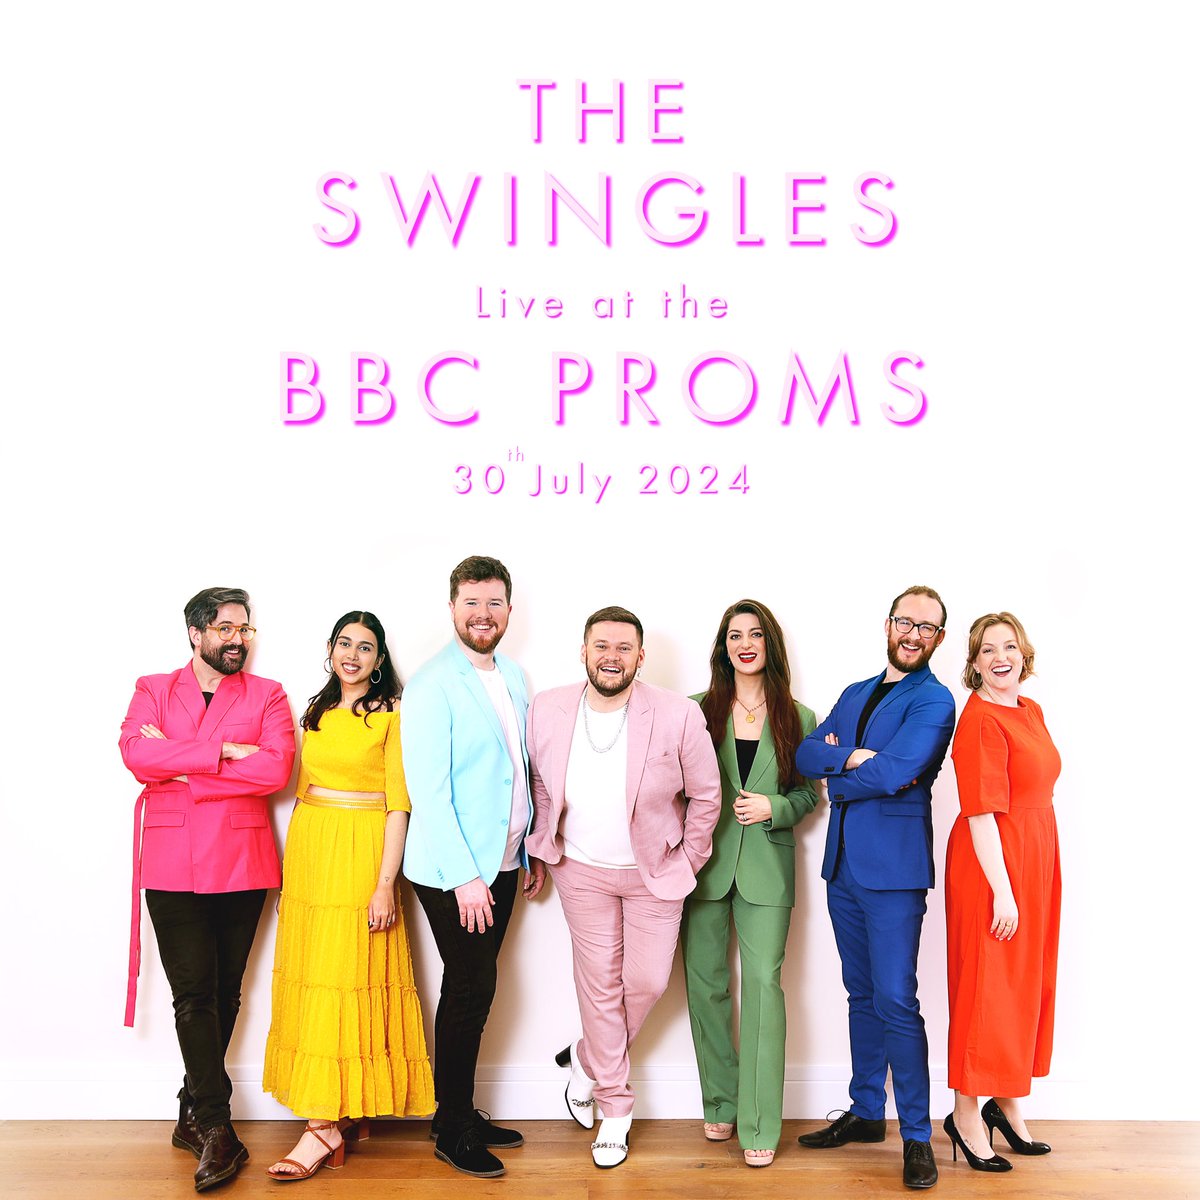 We are honoured to announce our upcoming performance at the BBC Proms this summer, at the Royal Albert Hall at 7:30pm on July 30th (prom 15)! #BBCProms #acappella #royalalberthall #london #londonmusic #singing #acapella #BBCProms2024